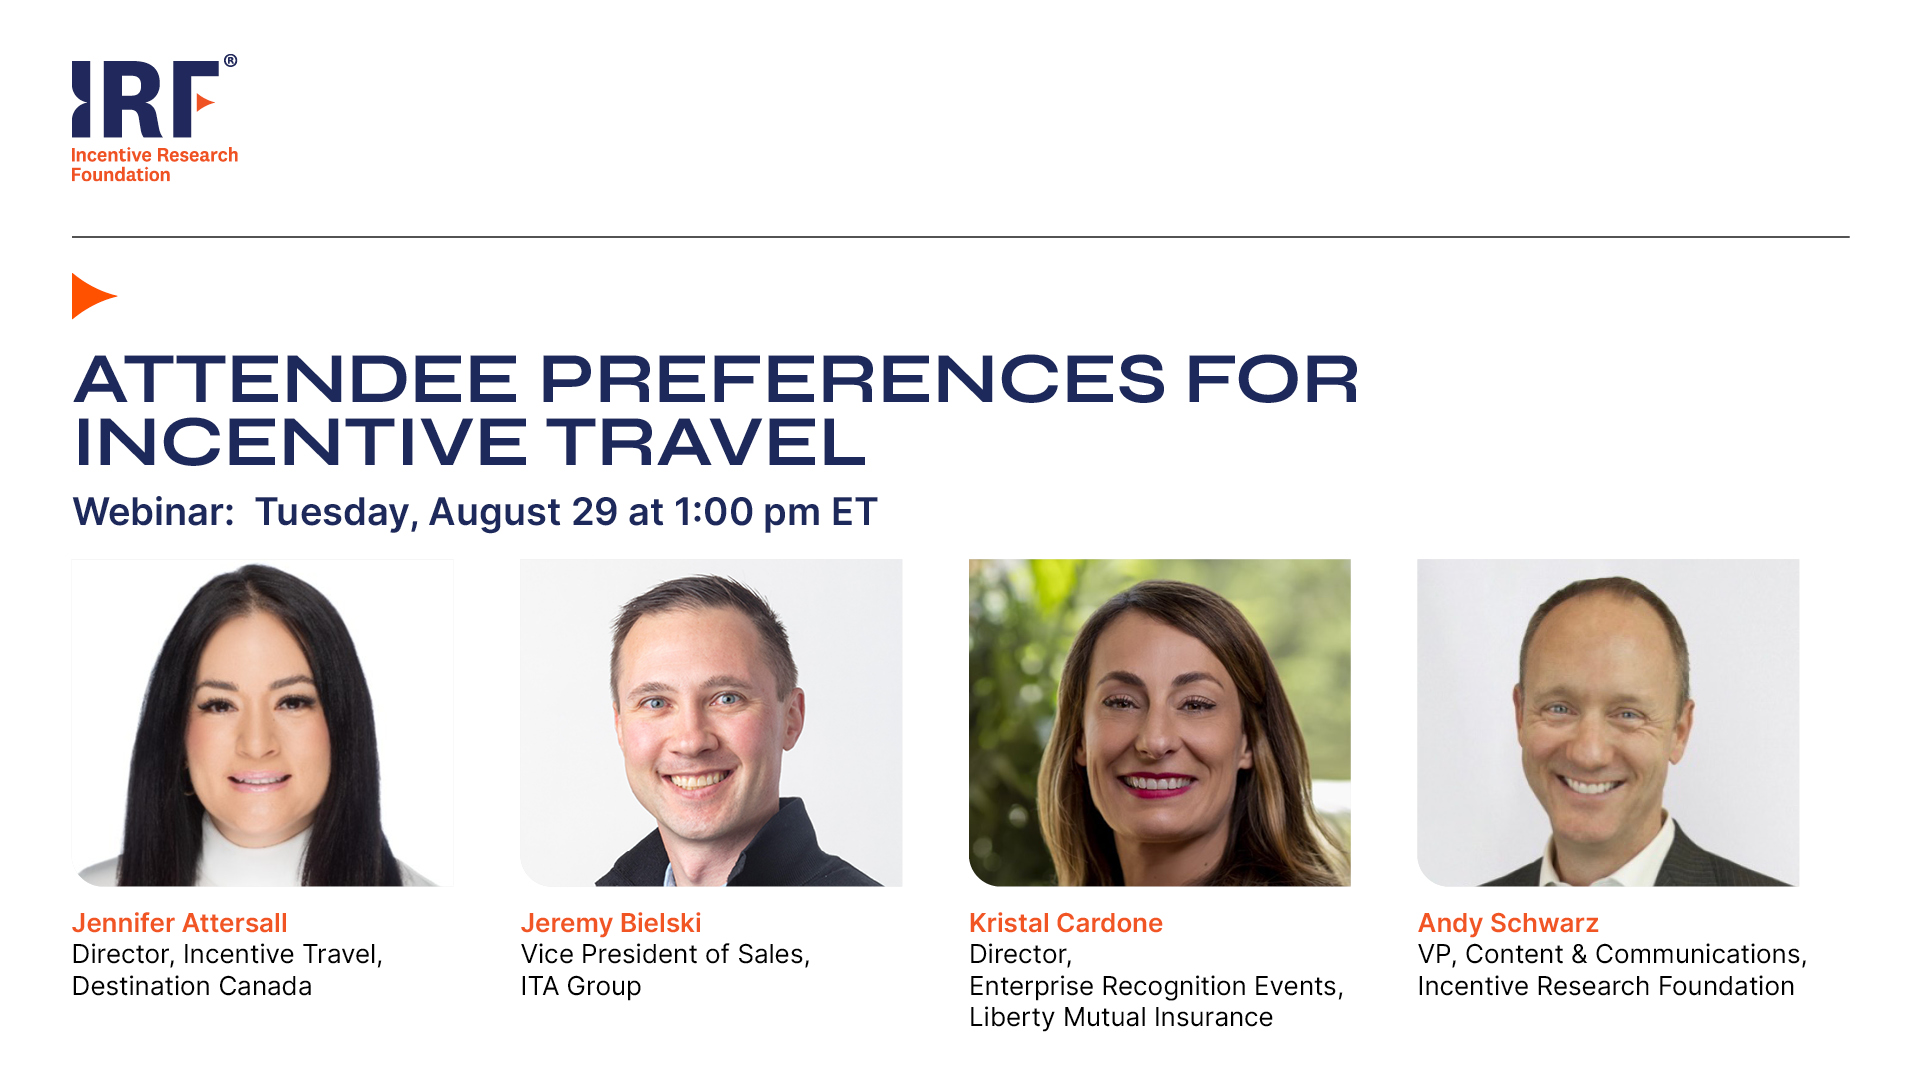 IRF Webinar: Attendee Preferences for Incentive Travel